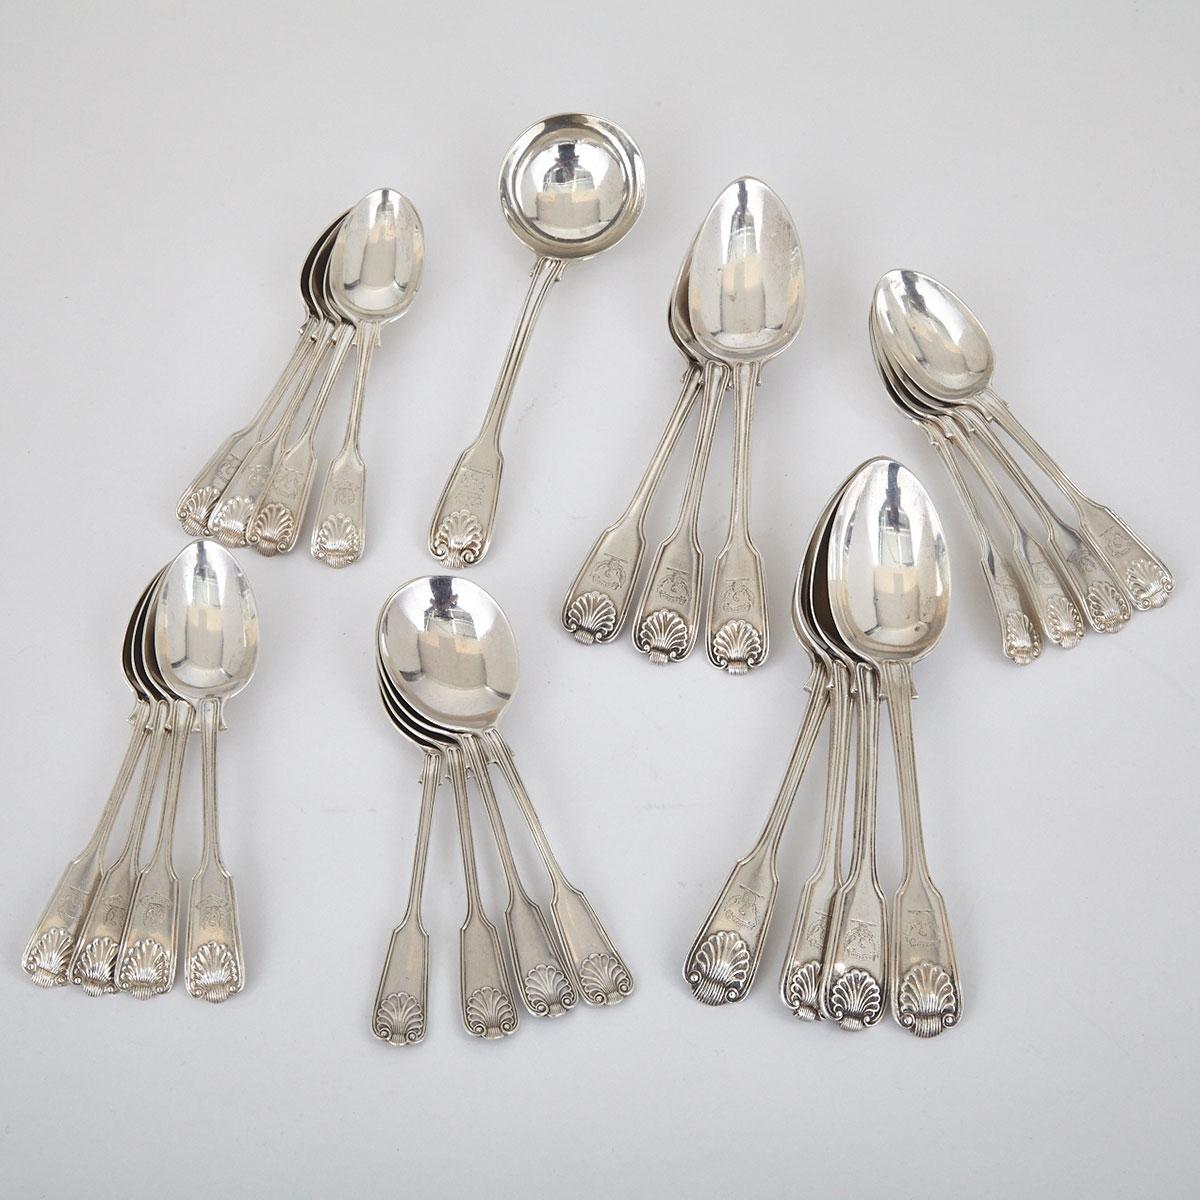 George IV, Victorian and Later Silver Fiddle, Thread and Shell Pattern Flatware, 19th/20th century